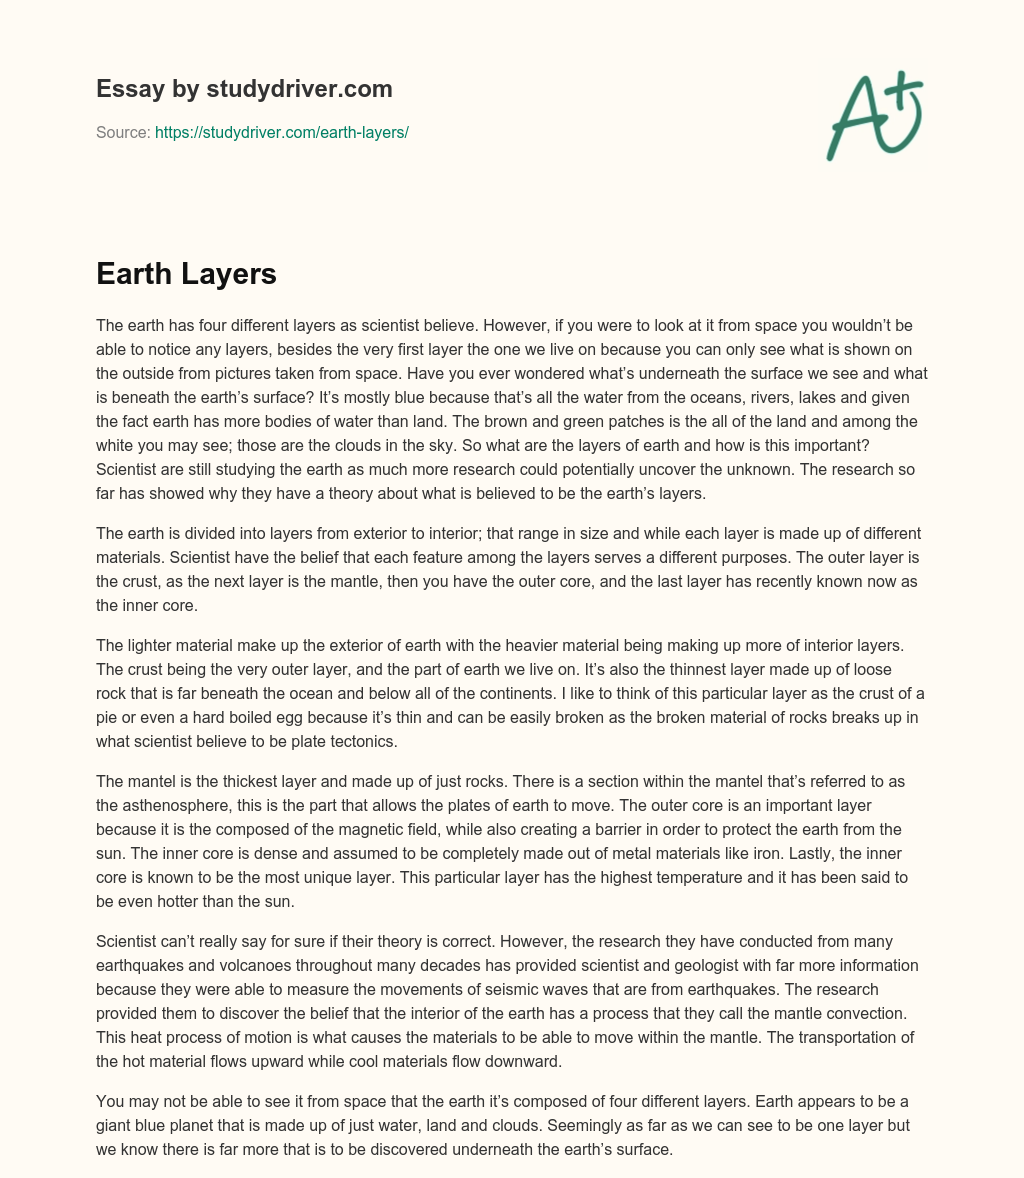 Earth Layers essay